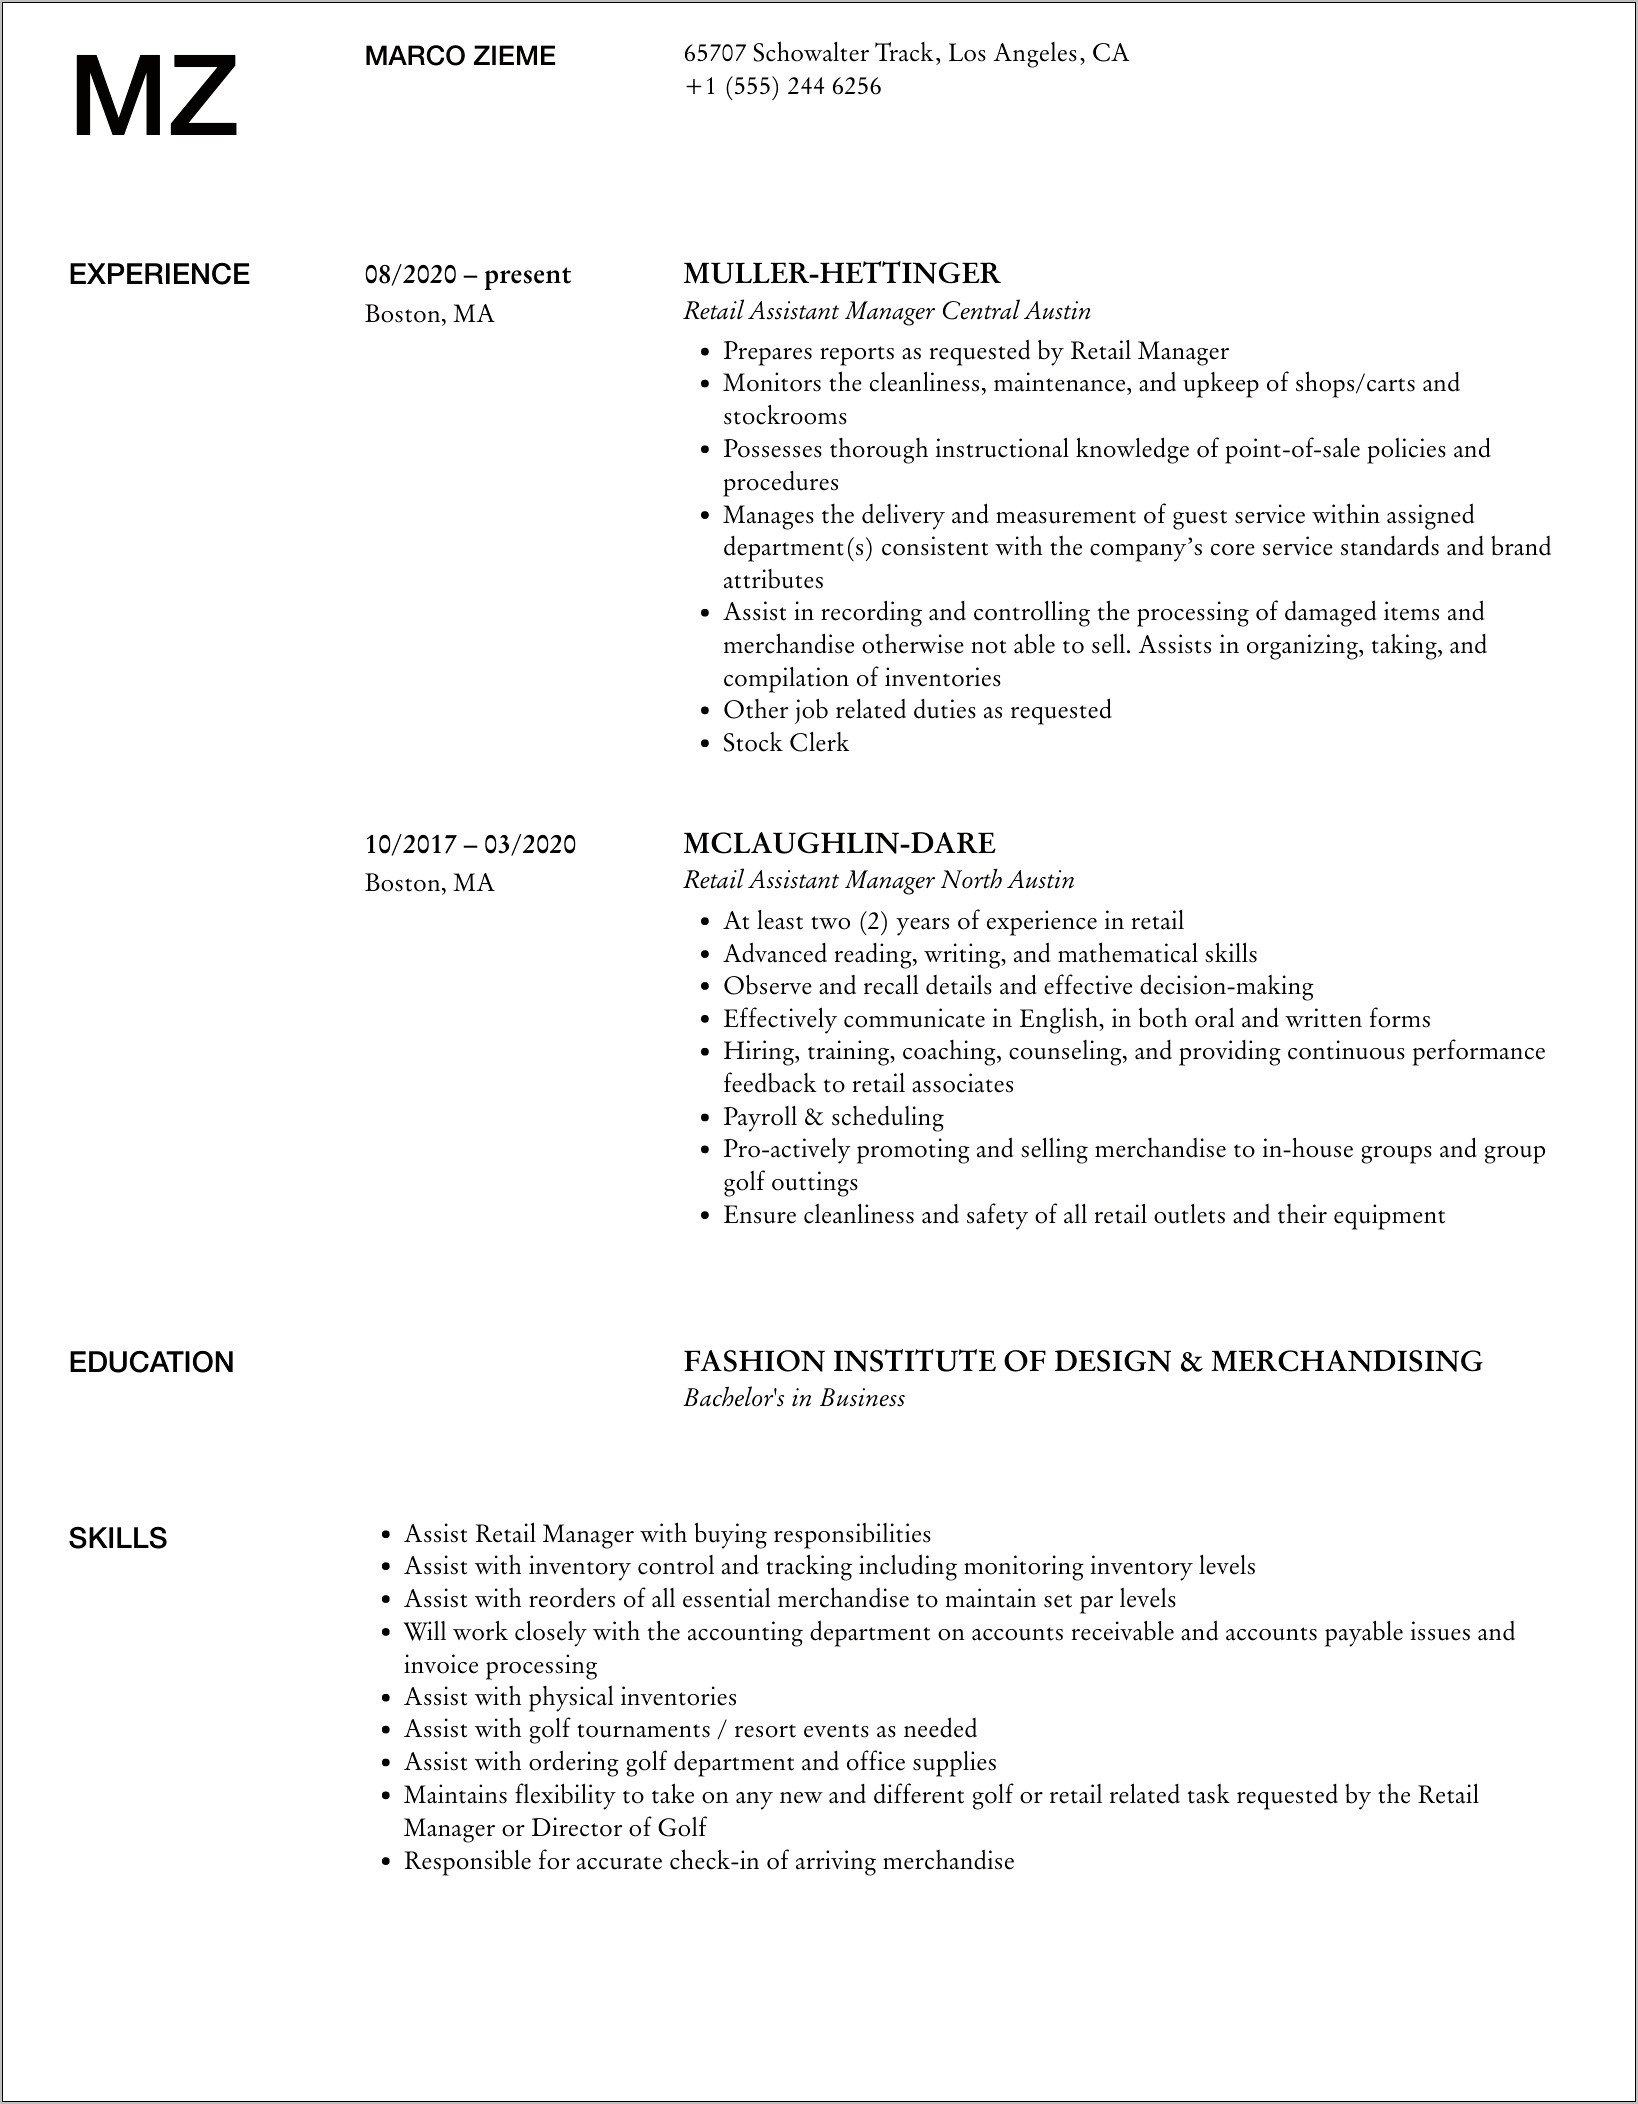 Retail Assistant Manager Skills Resume